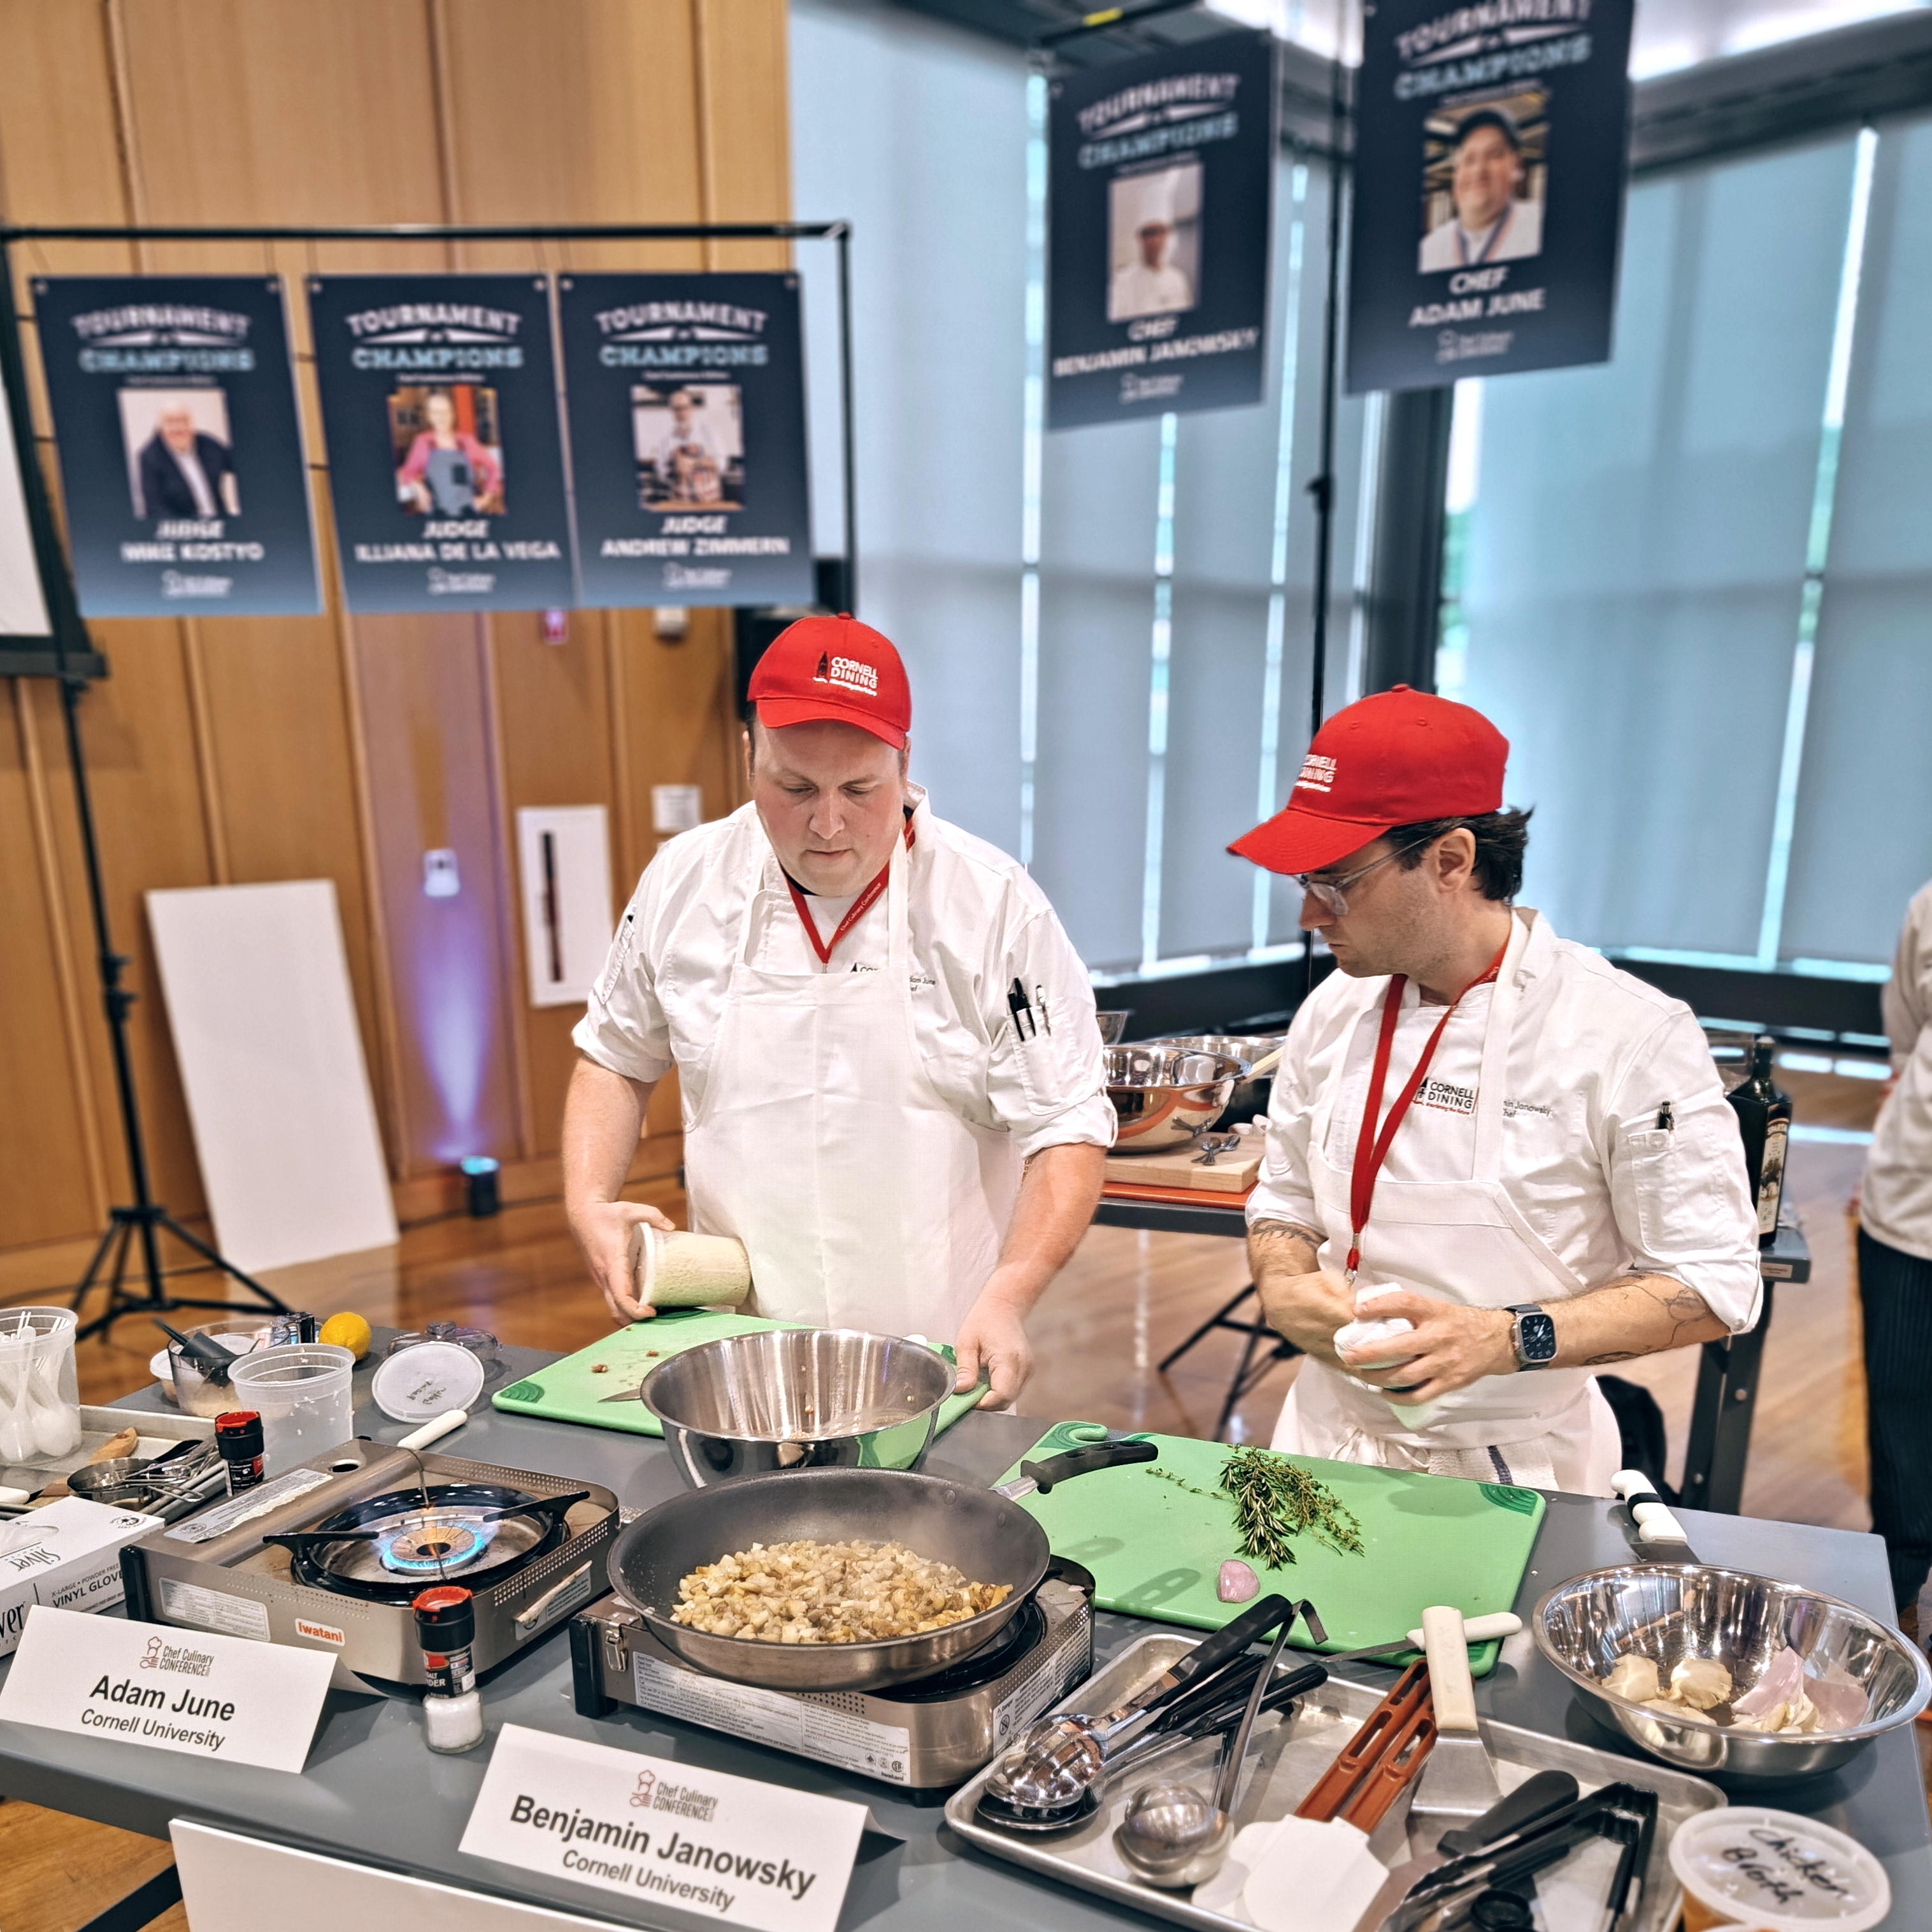 Chefs Adam June and Benjamin Janowsky at a workstation with food and utensils